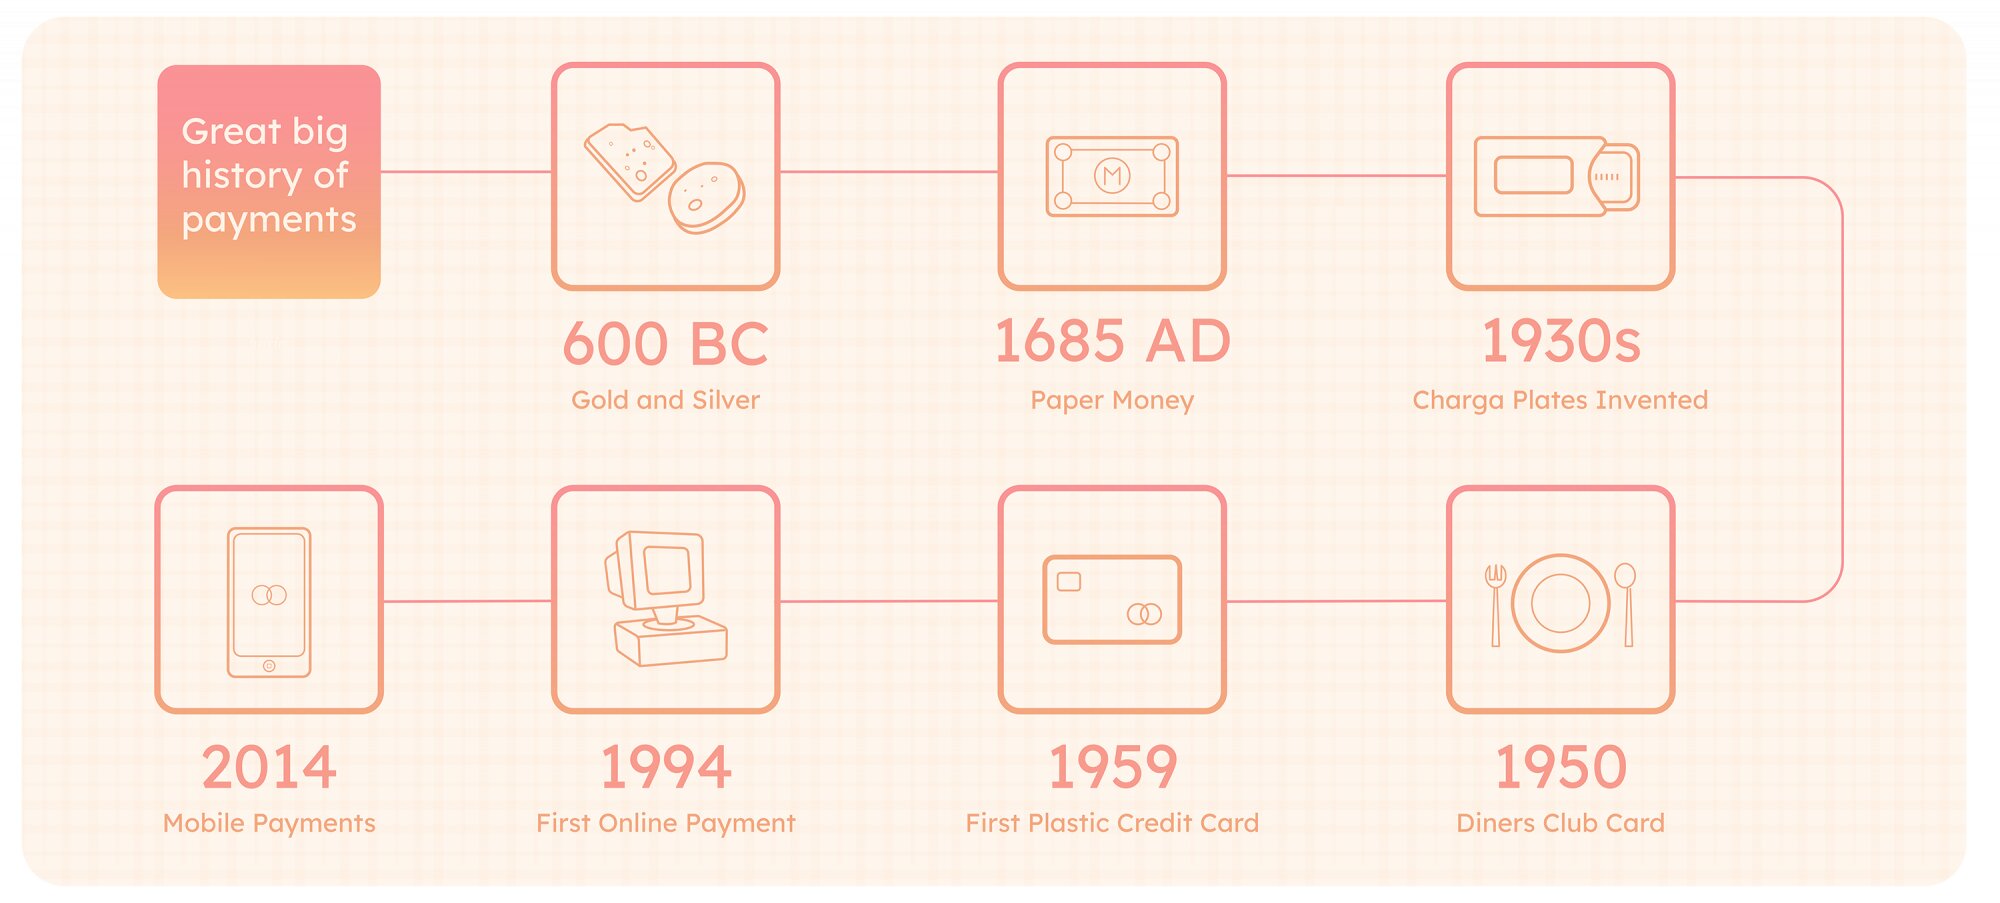 the great big history of payments